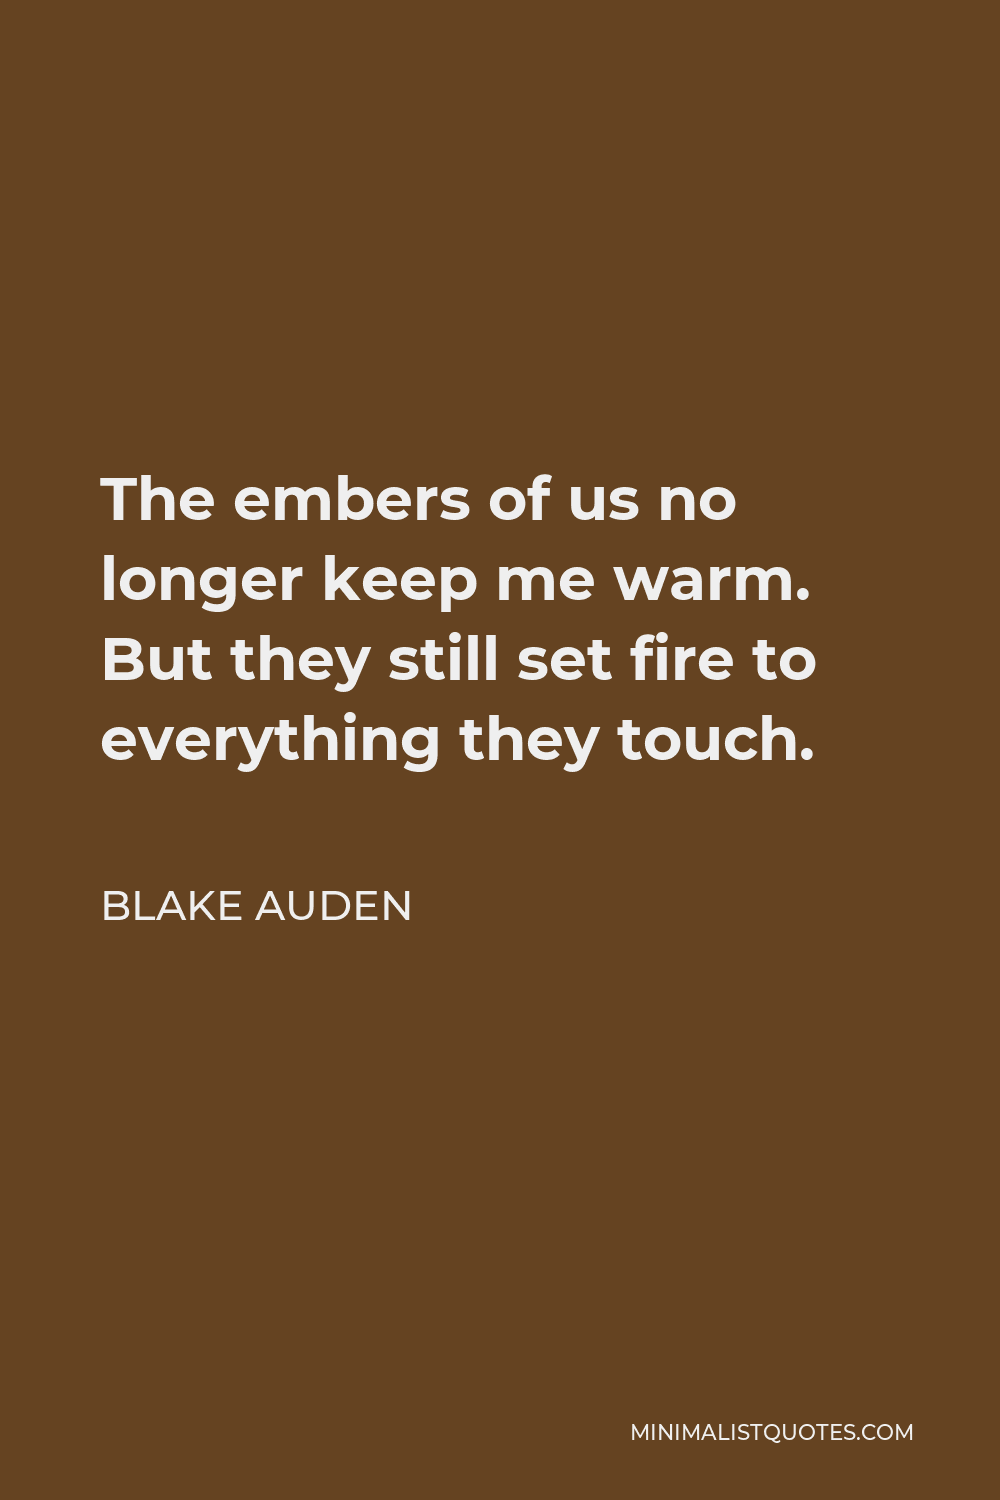 Blake Auden Quote - The embers of us no longer keep me warm. But they still set fire to everything they touch.